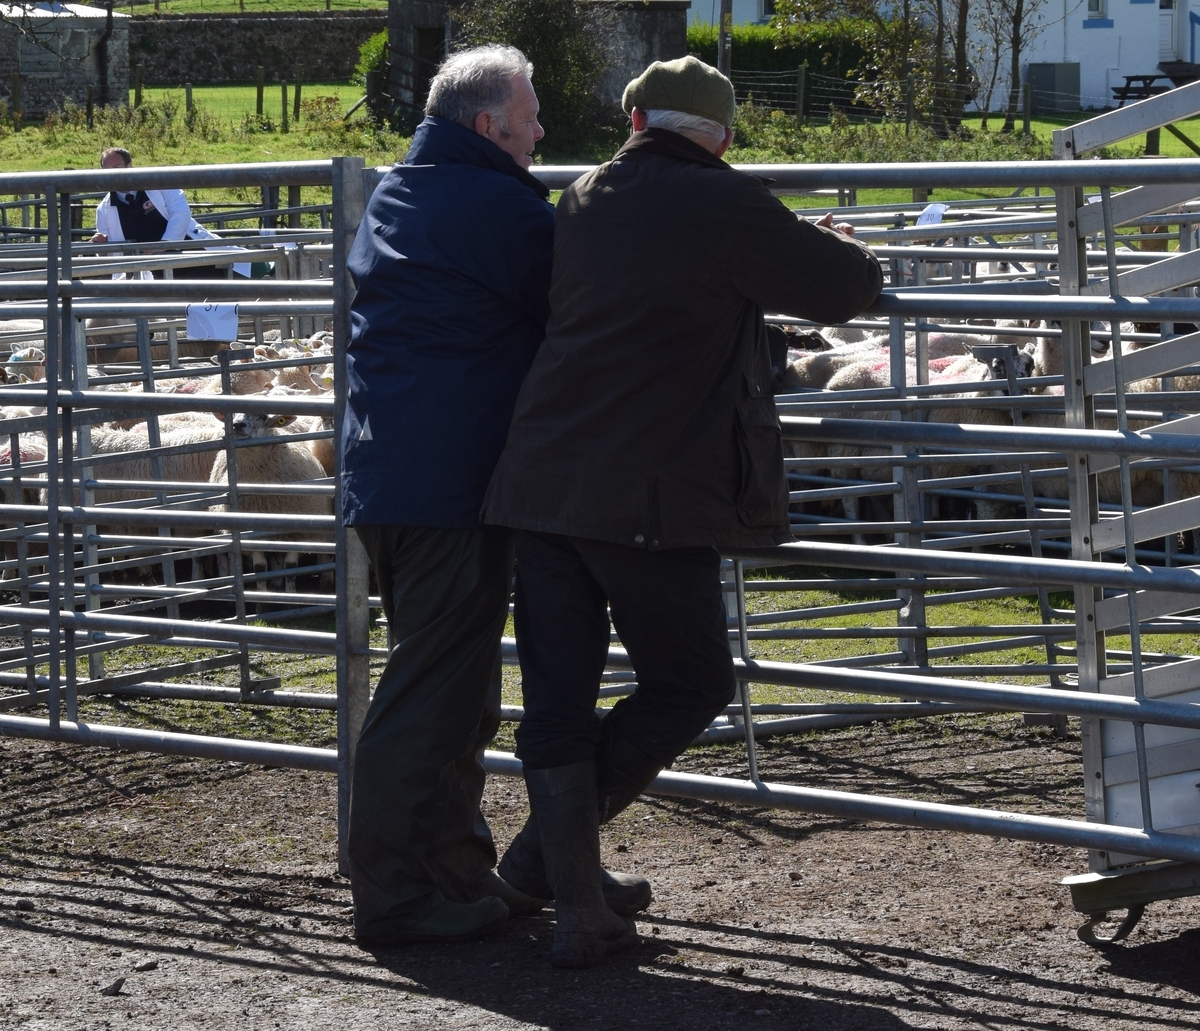 Rules in place to ensure safety at sheep sale